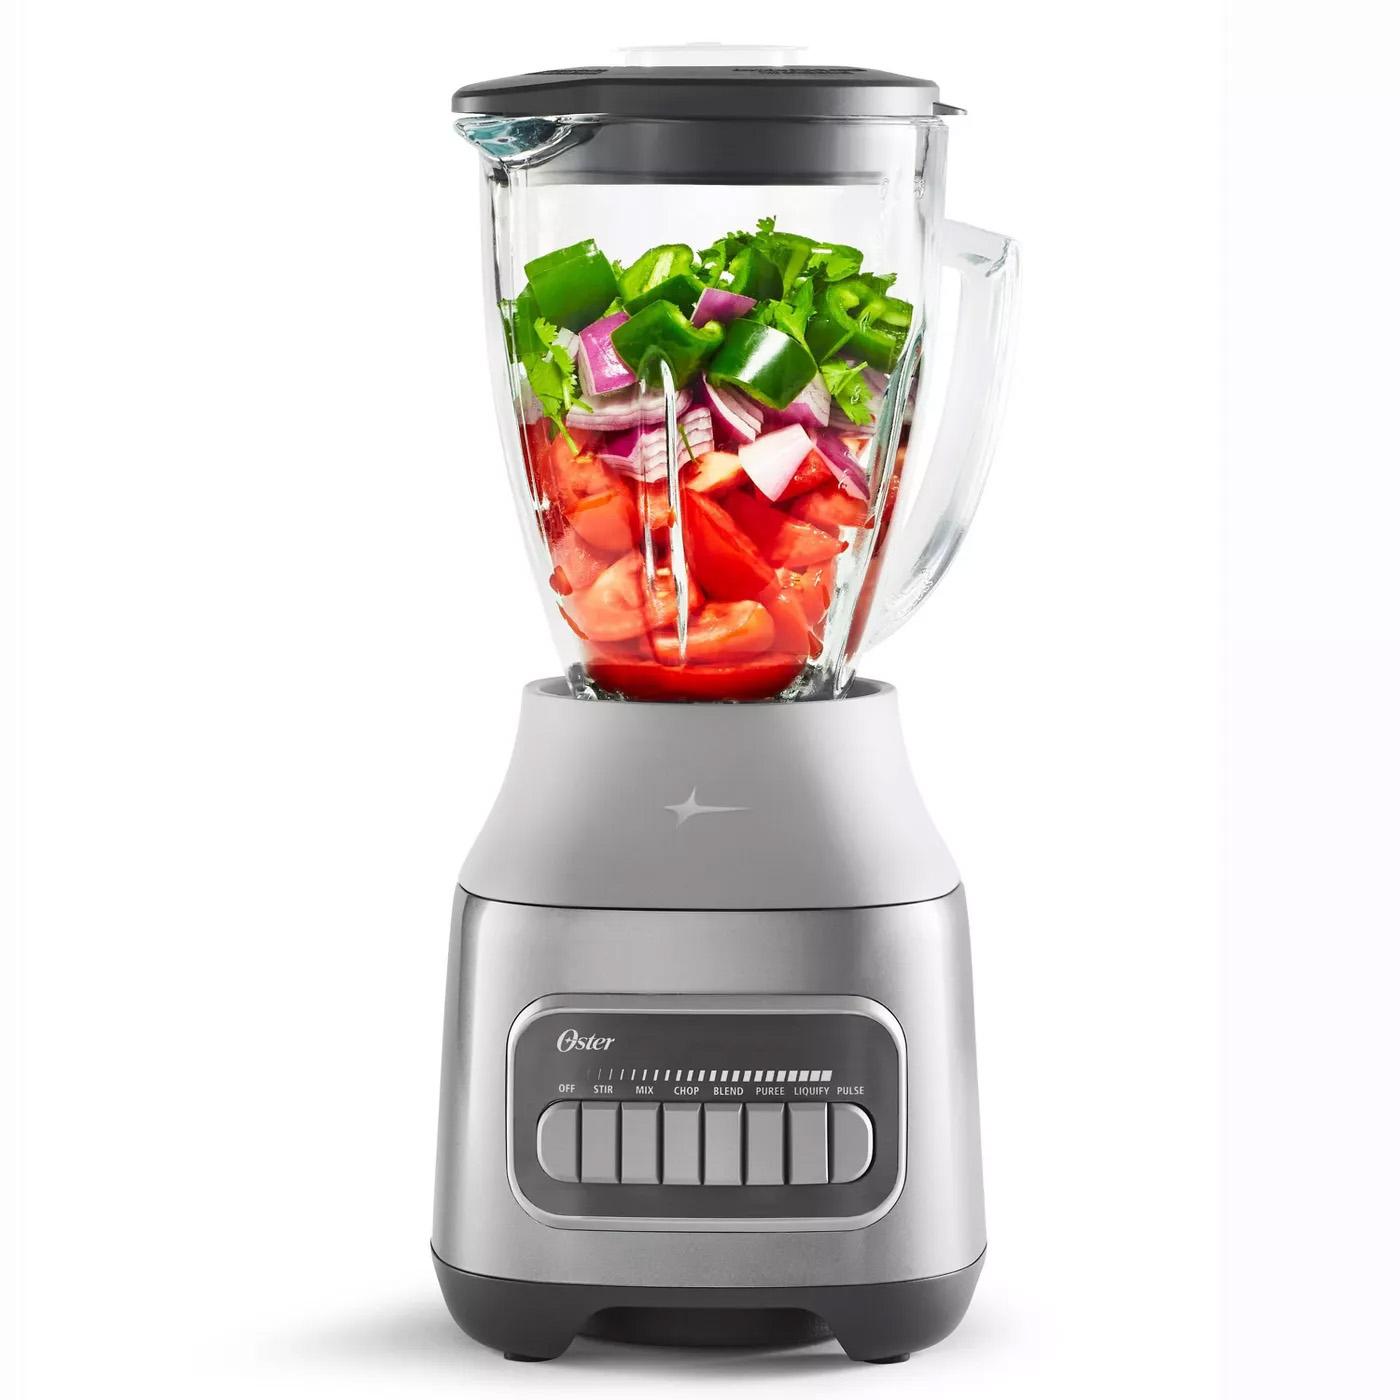 Oster 800W Pulverizing Power Blender with 6-Cup Glass Jar for $20